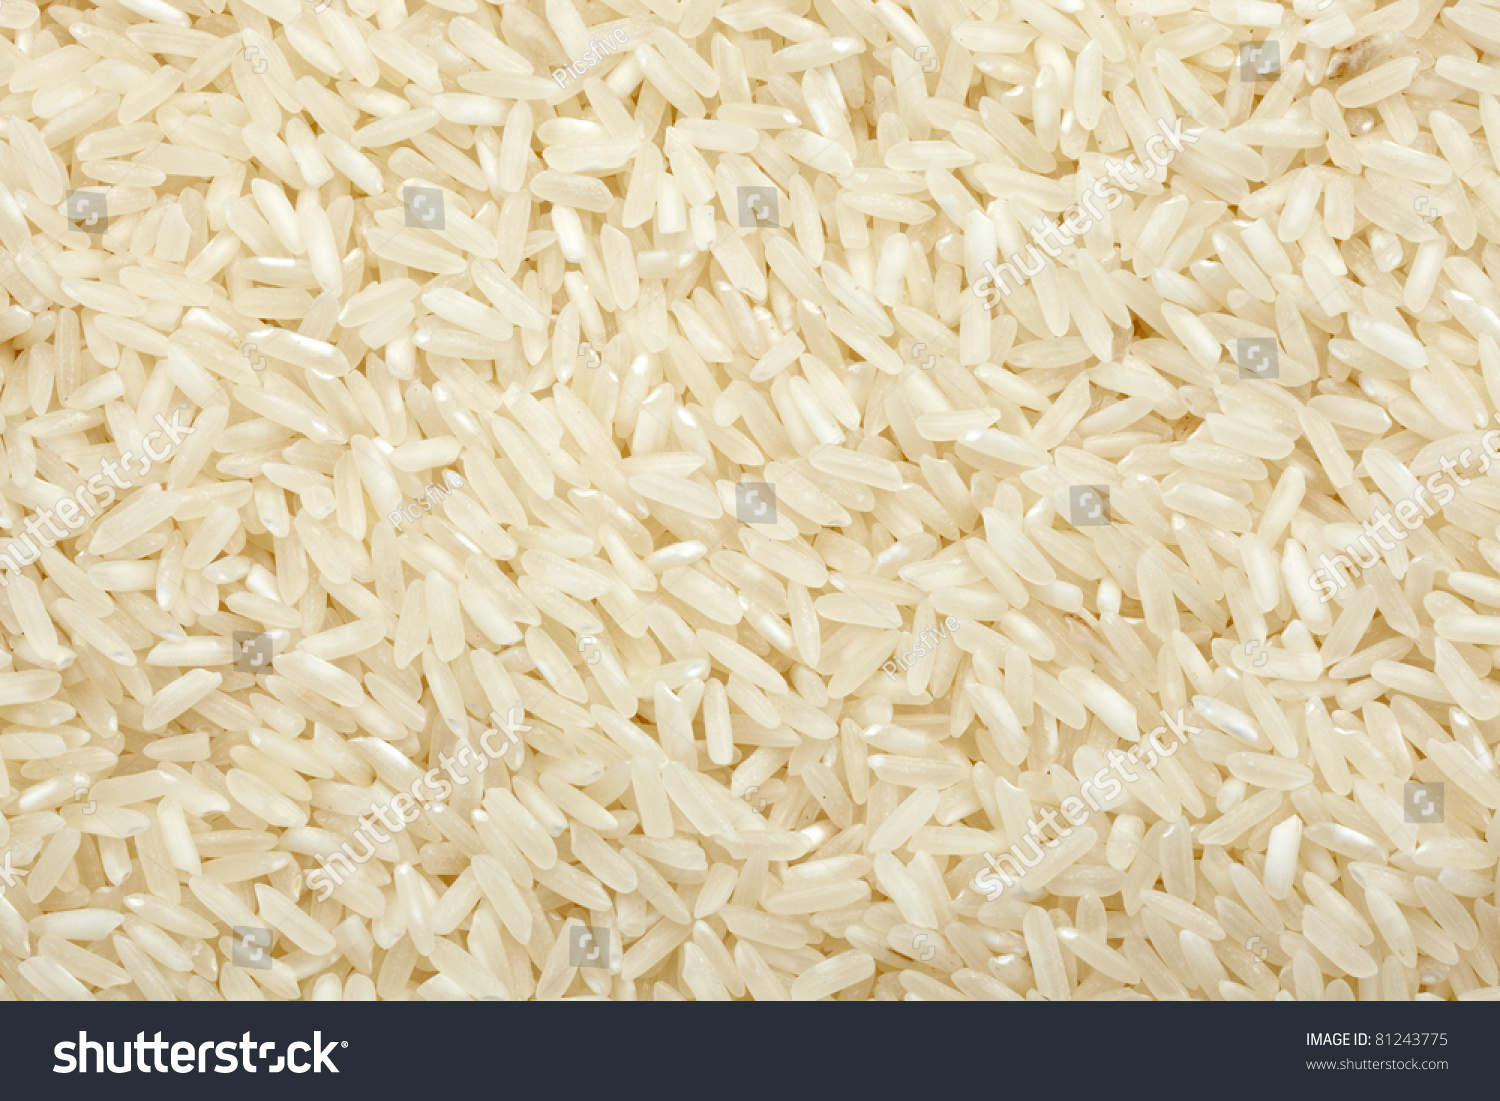 Close Up Of A Rice Background Food Stock Photo 81243775 : Shutterstock